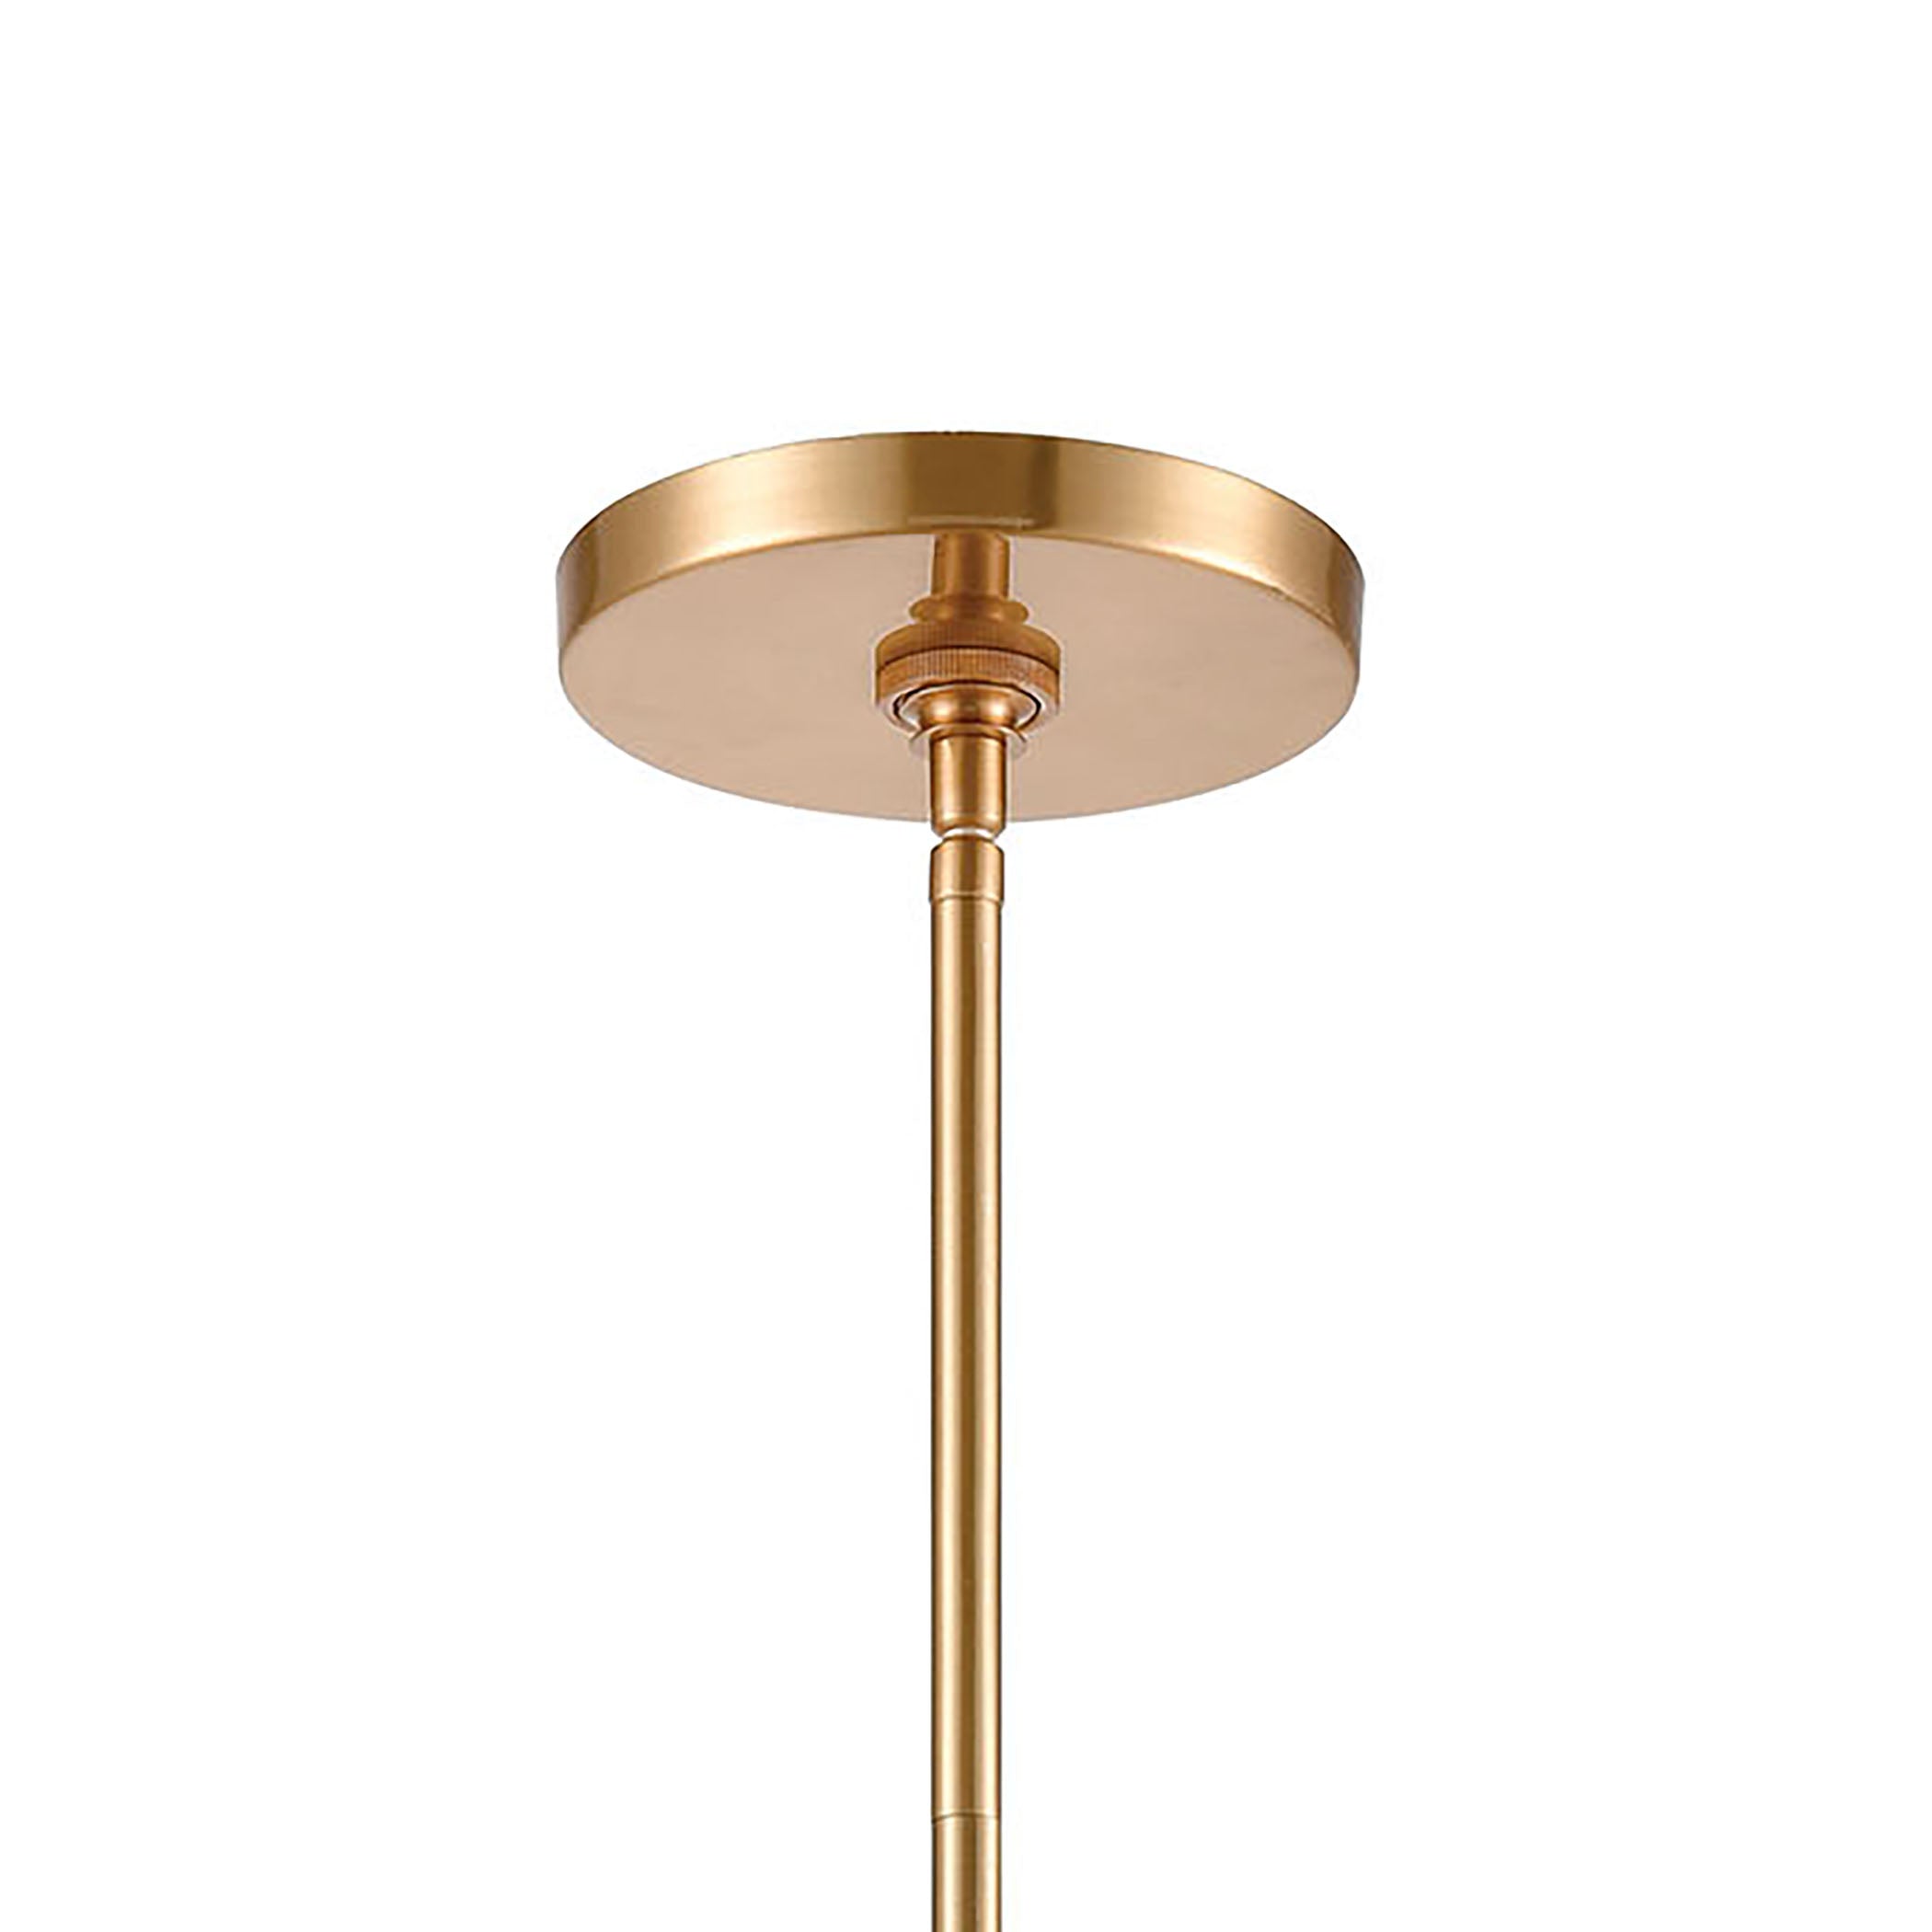 ELK Lighting 32351/1 Collective 1-Light Mini Pendant in Satin Brass with Clear Glass